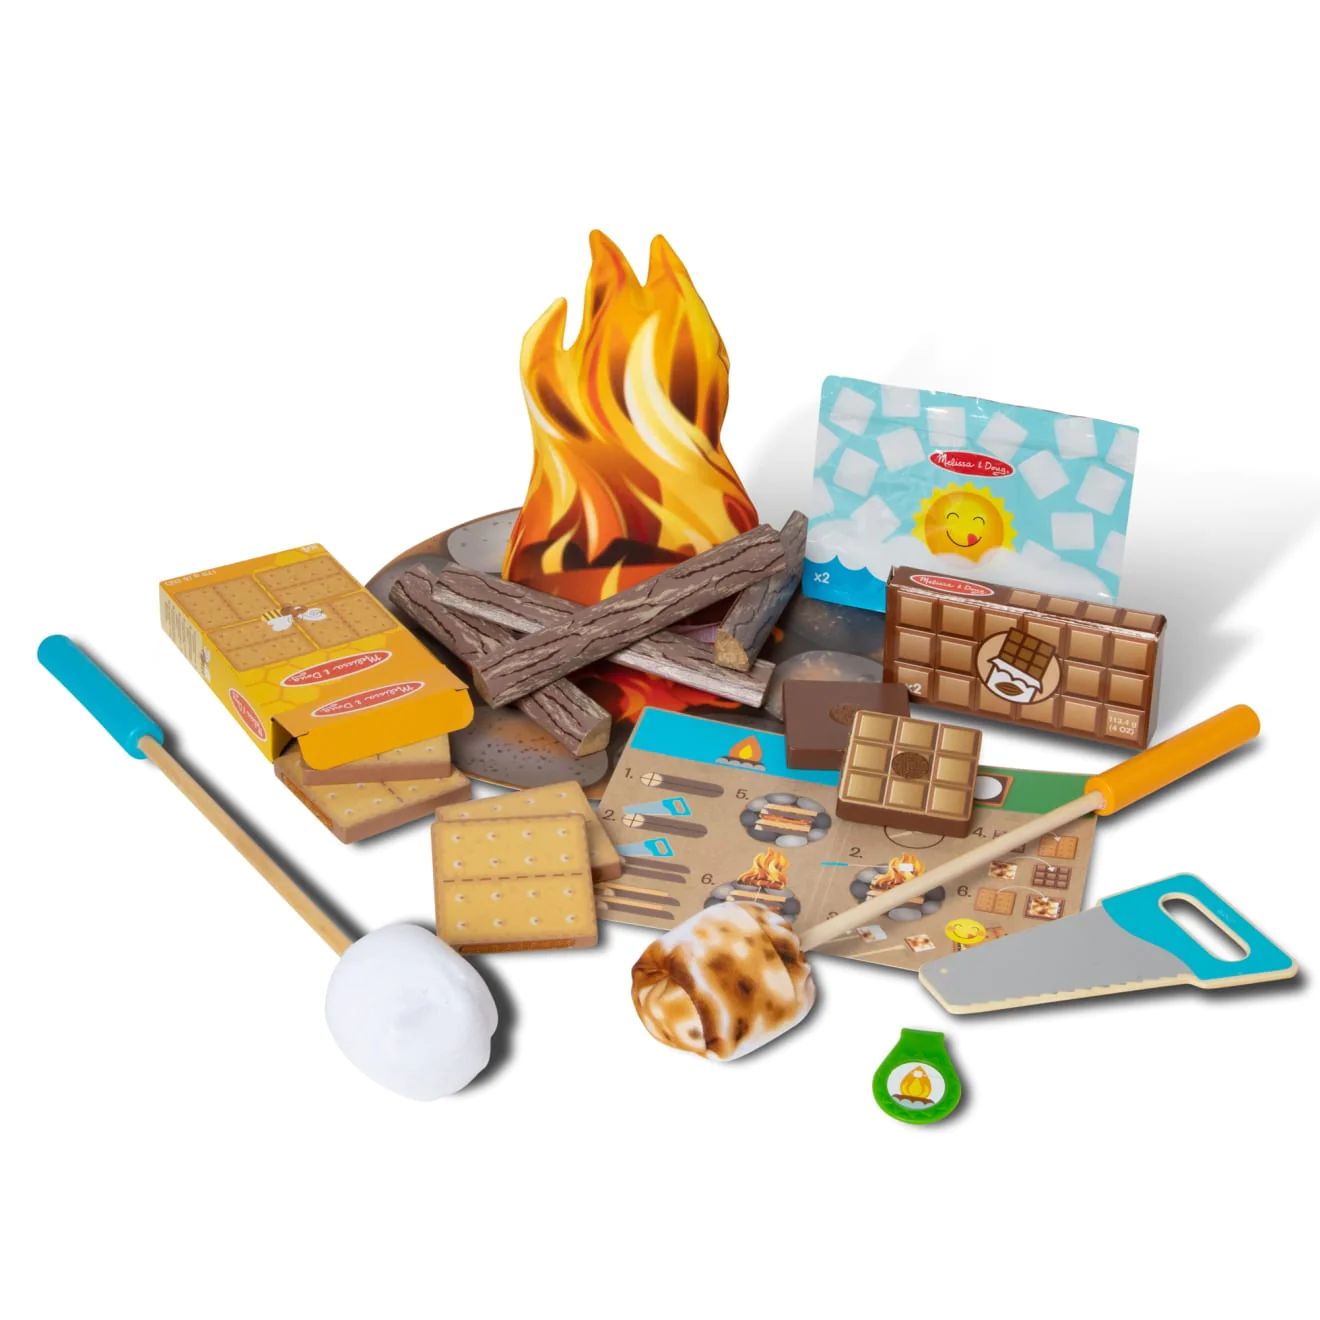 Let's Explore Campfire S'Mores Play Set | Melissa and Doug